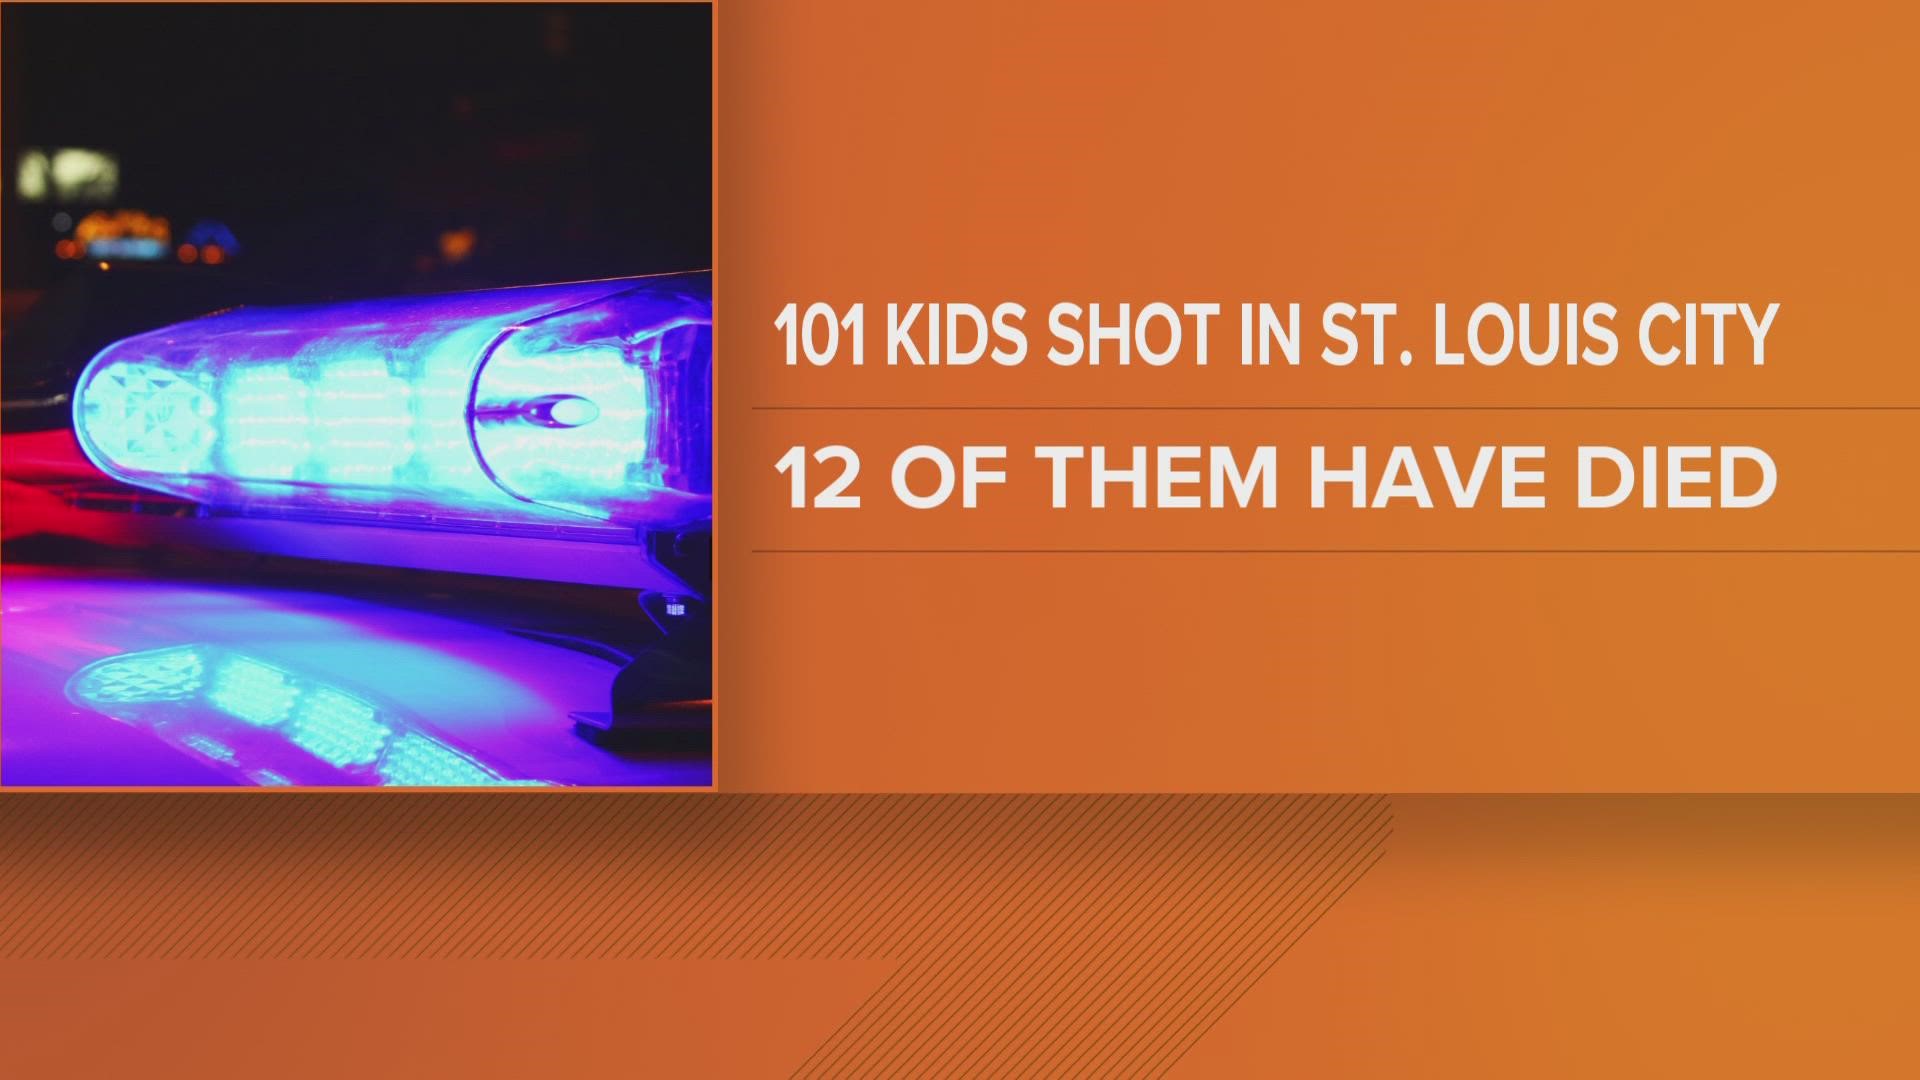 The St. Louis Metropolitan Police Department said the boy arrived at the hospital at around midnight Thursday. He had been shot in the leg.